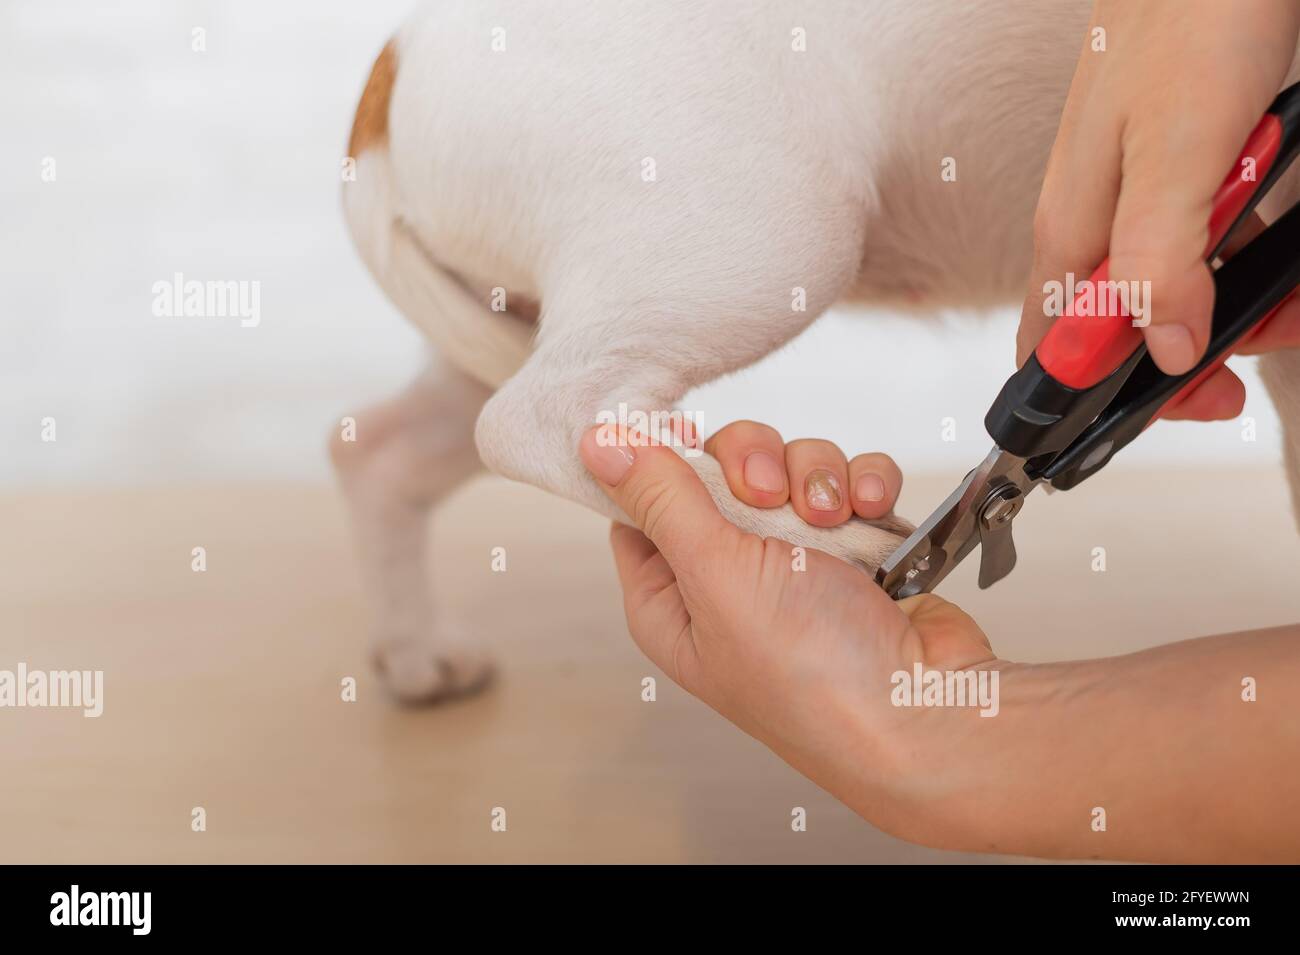 How To Cut Your Dog's Nails | Four Paws